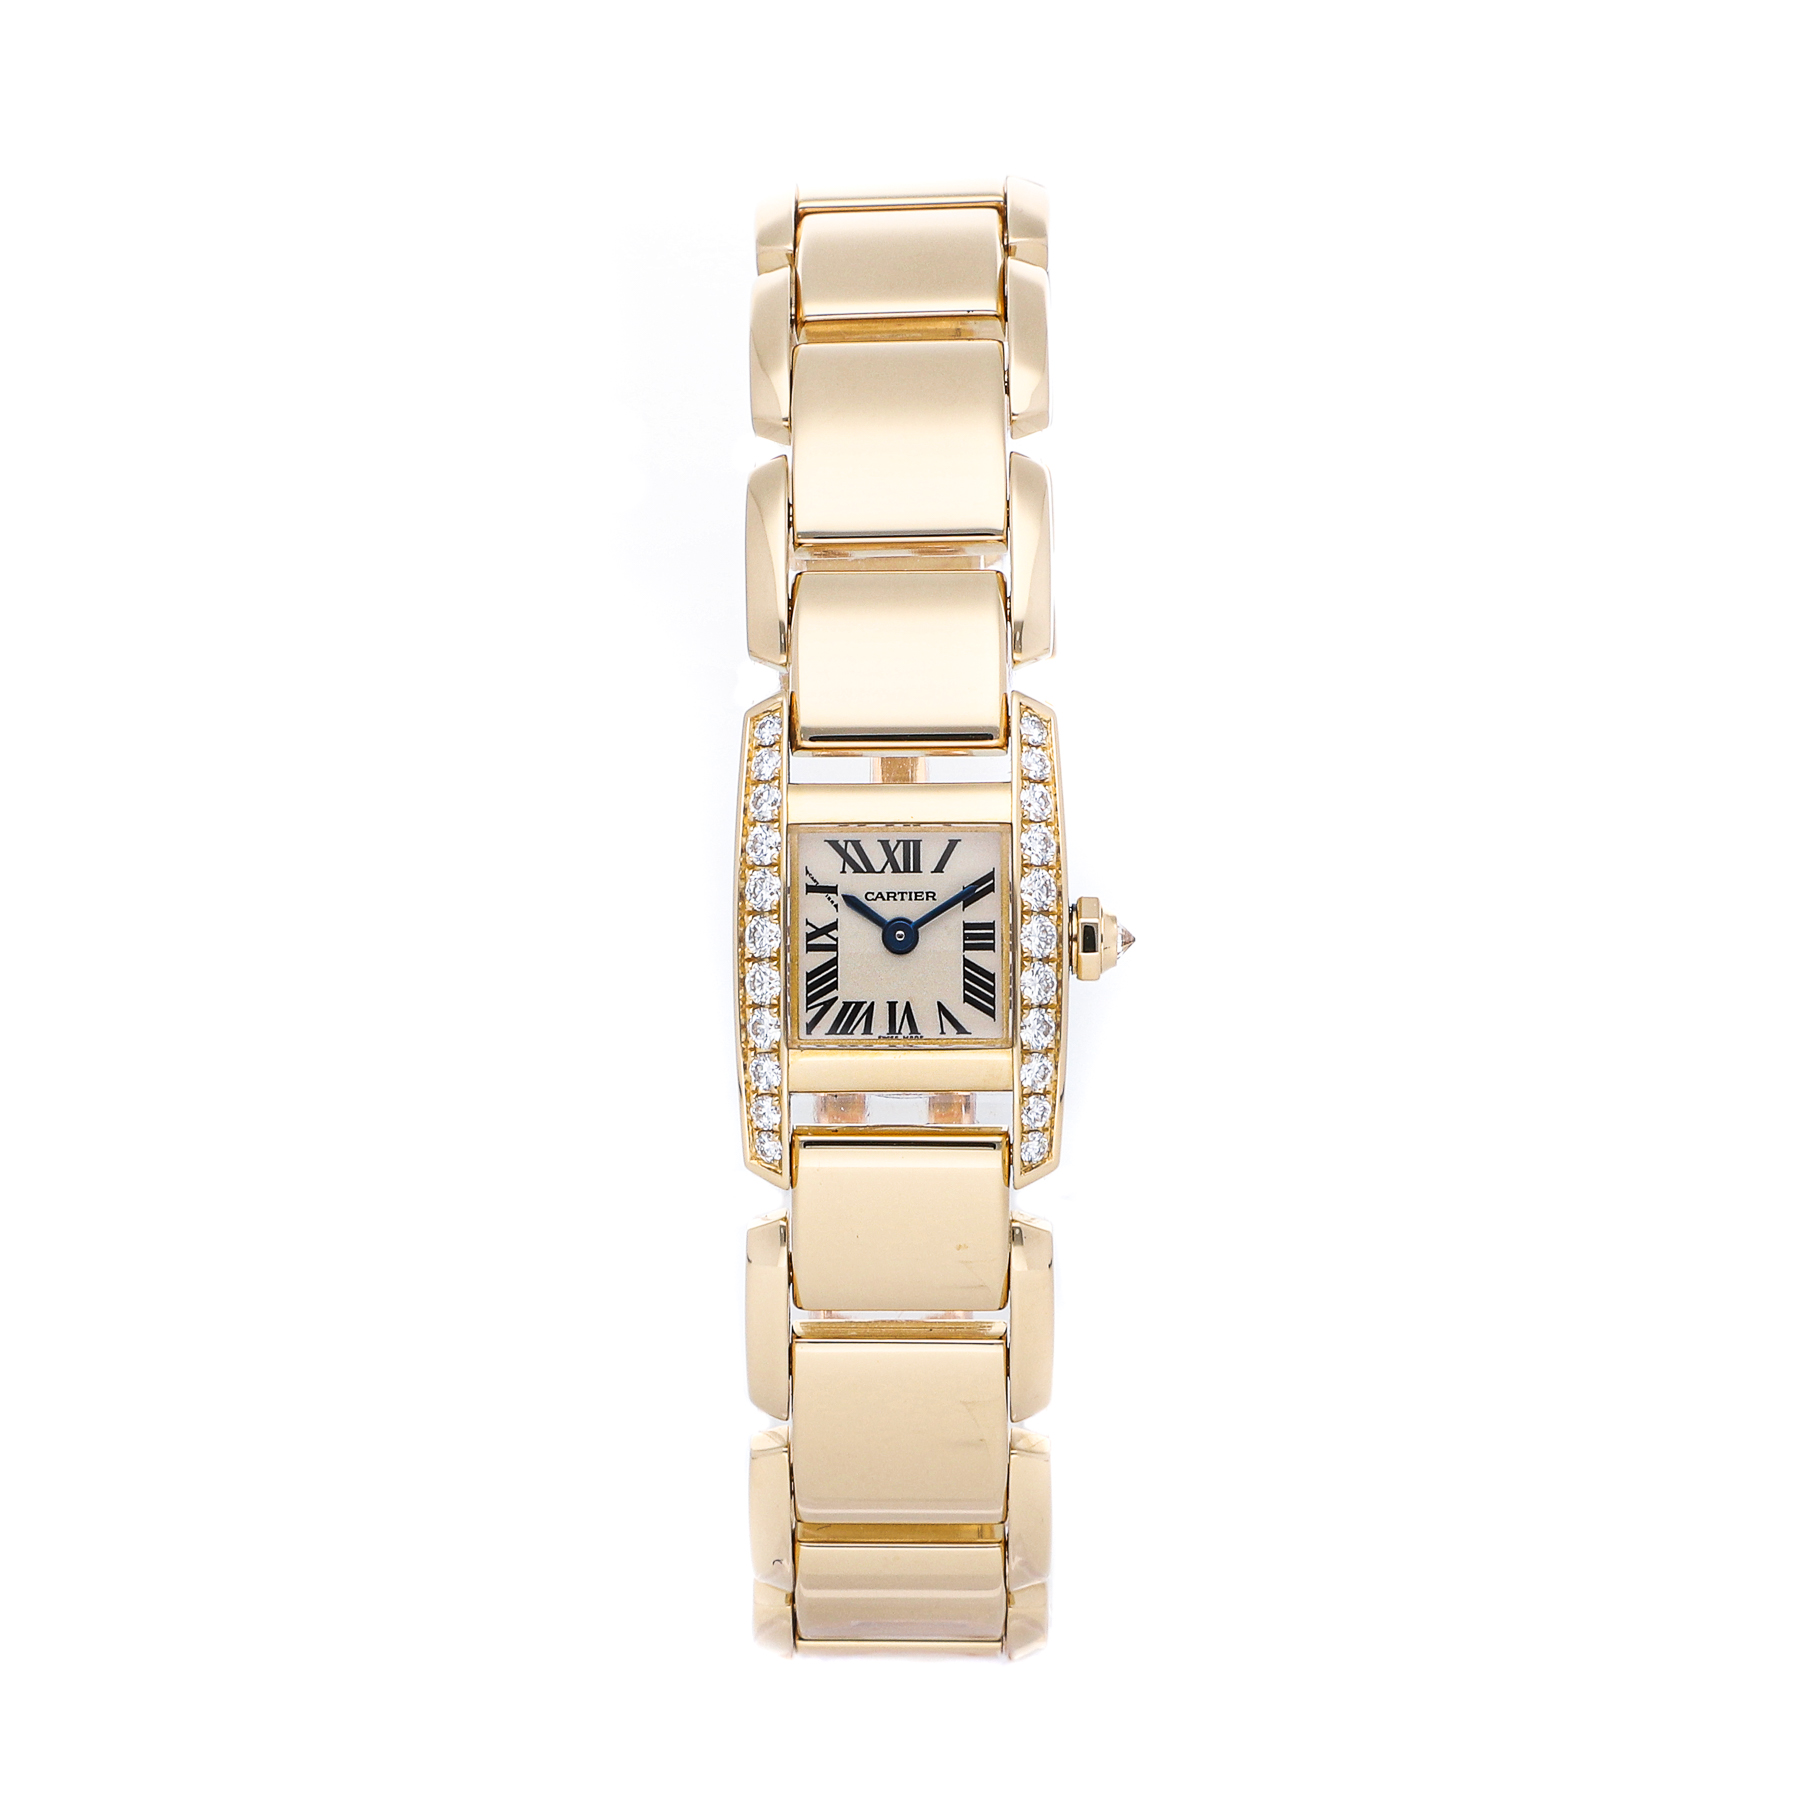 used cartier gold watches